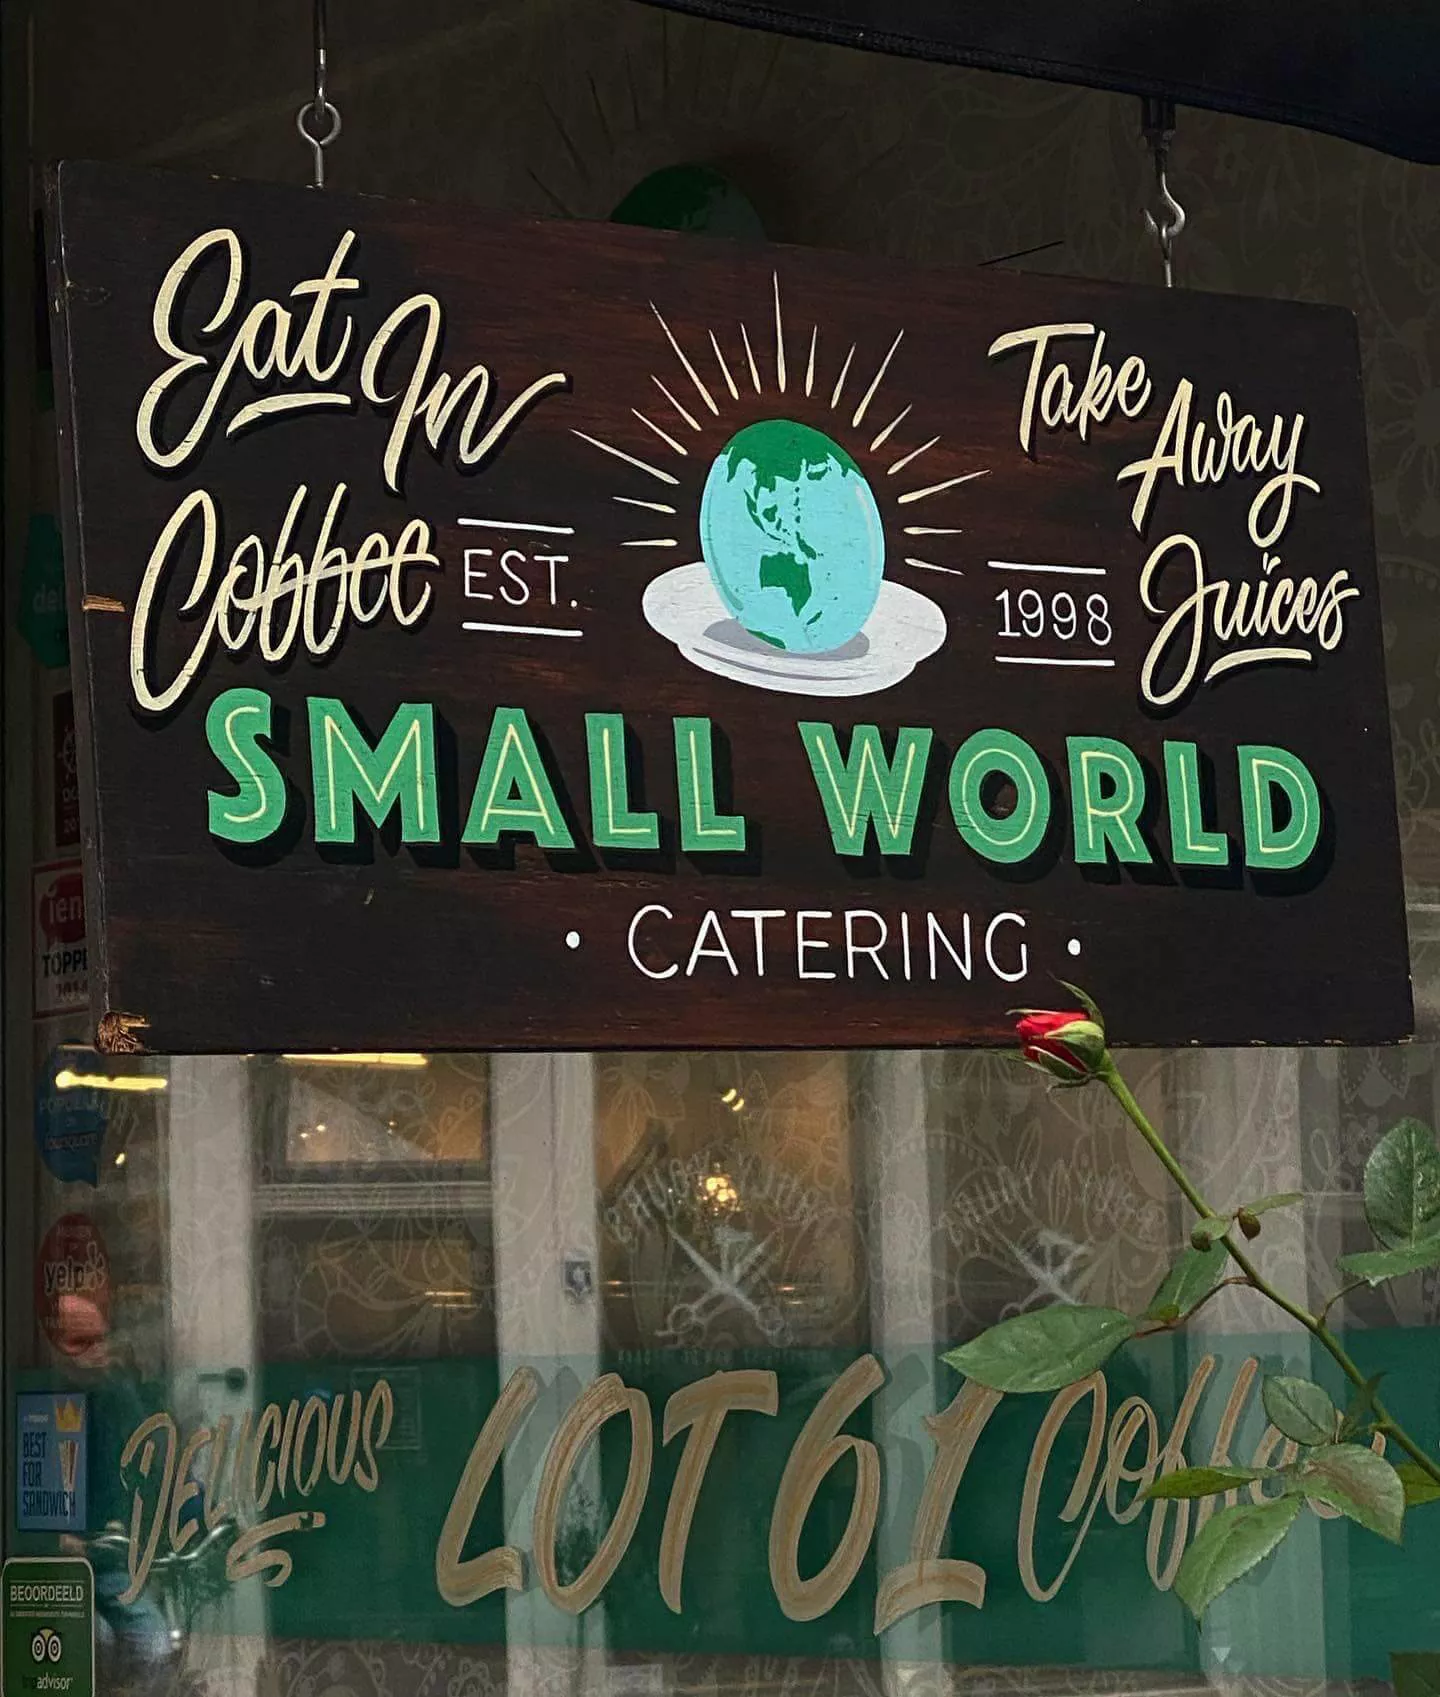 Book Small World Catering as a caterer for your next event on Venopi